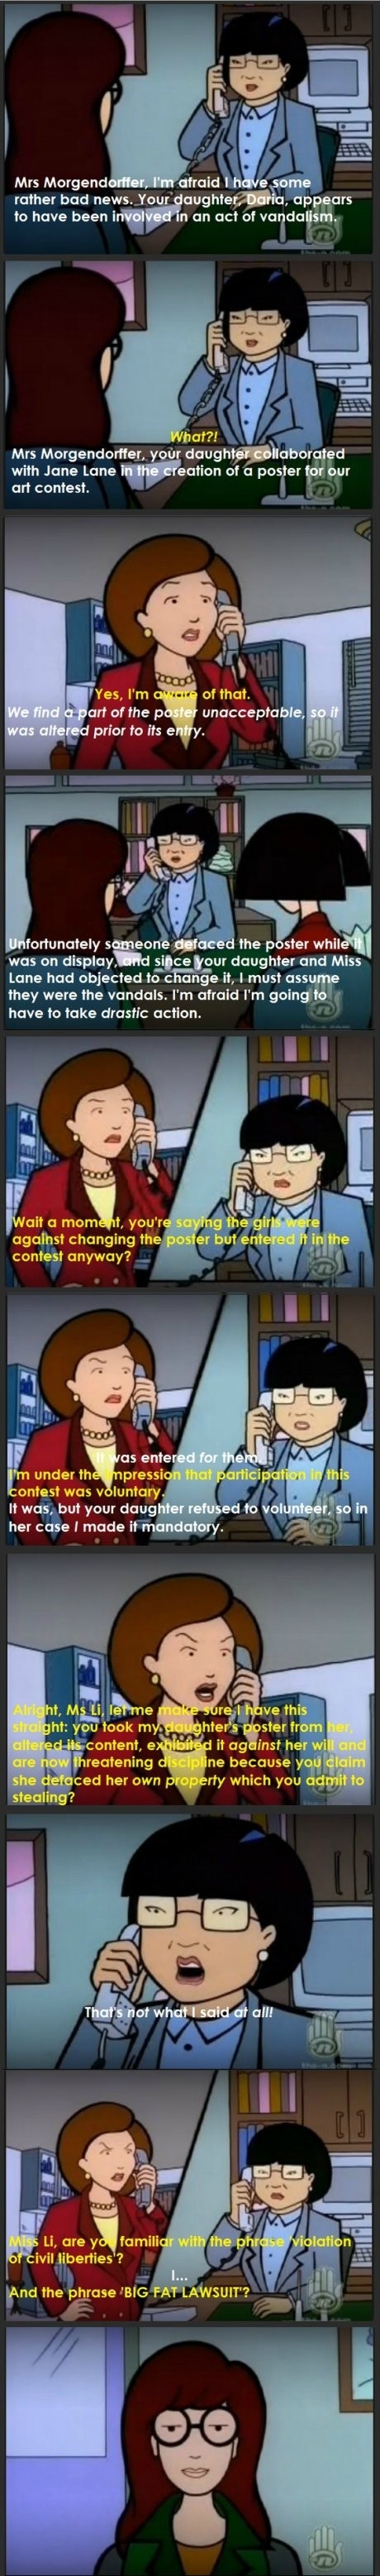 I miss Daria Sorry for the painful text